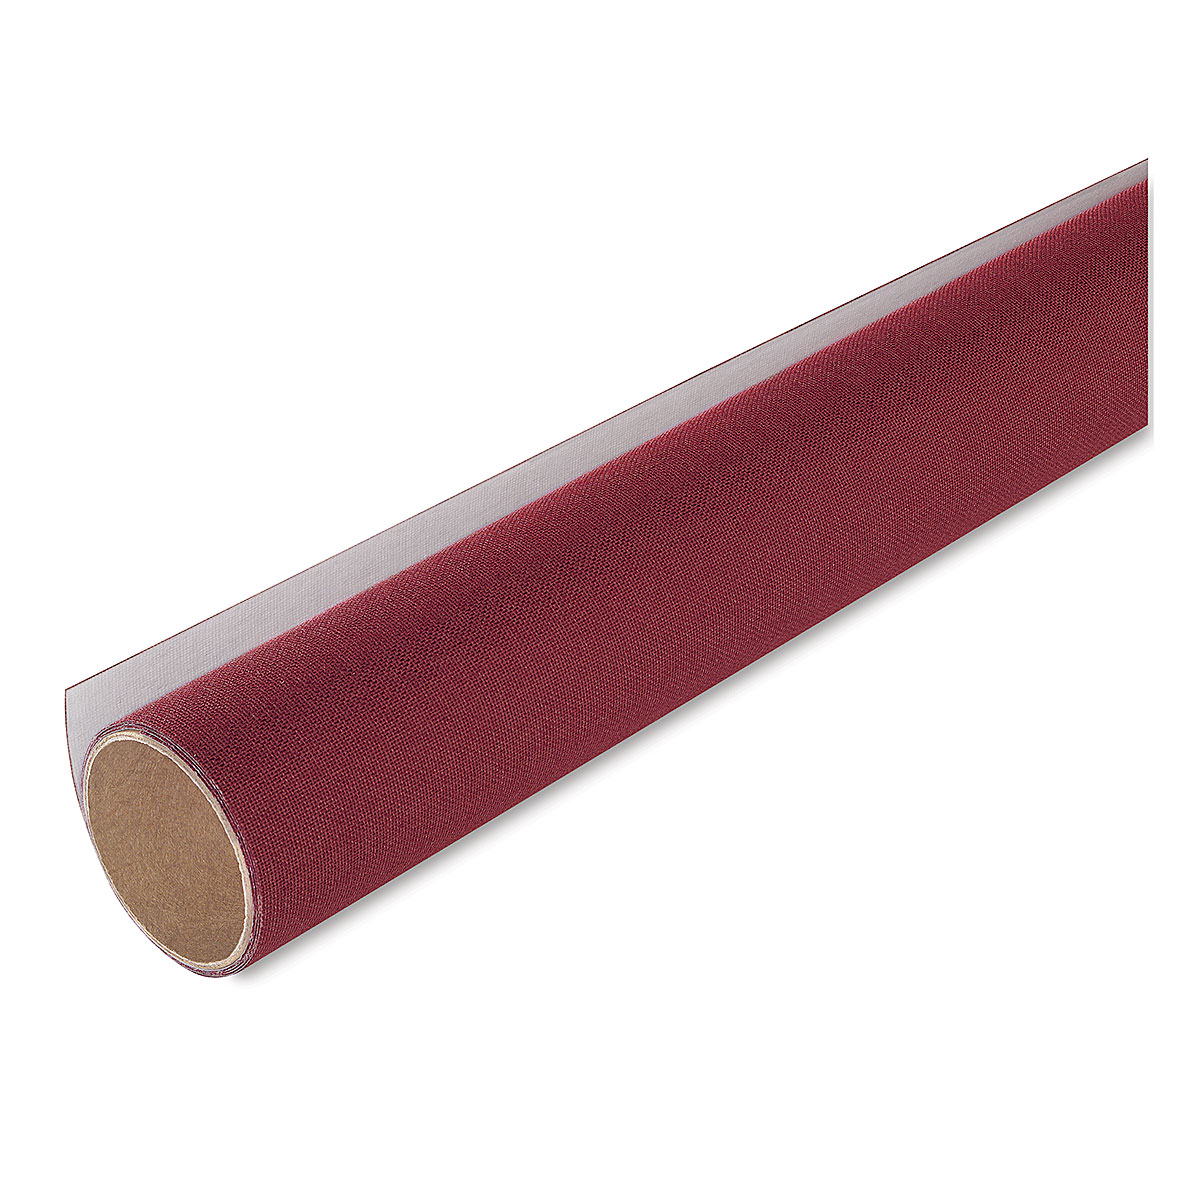 Maroon Book Cloth: 1 Partial Roll of Maroon, Japanese Paper-backed  Bookcloth for Bookbinding 